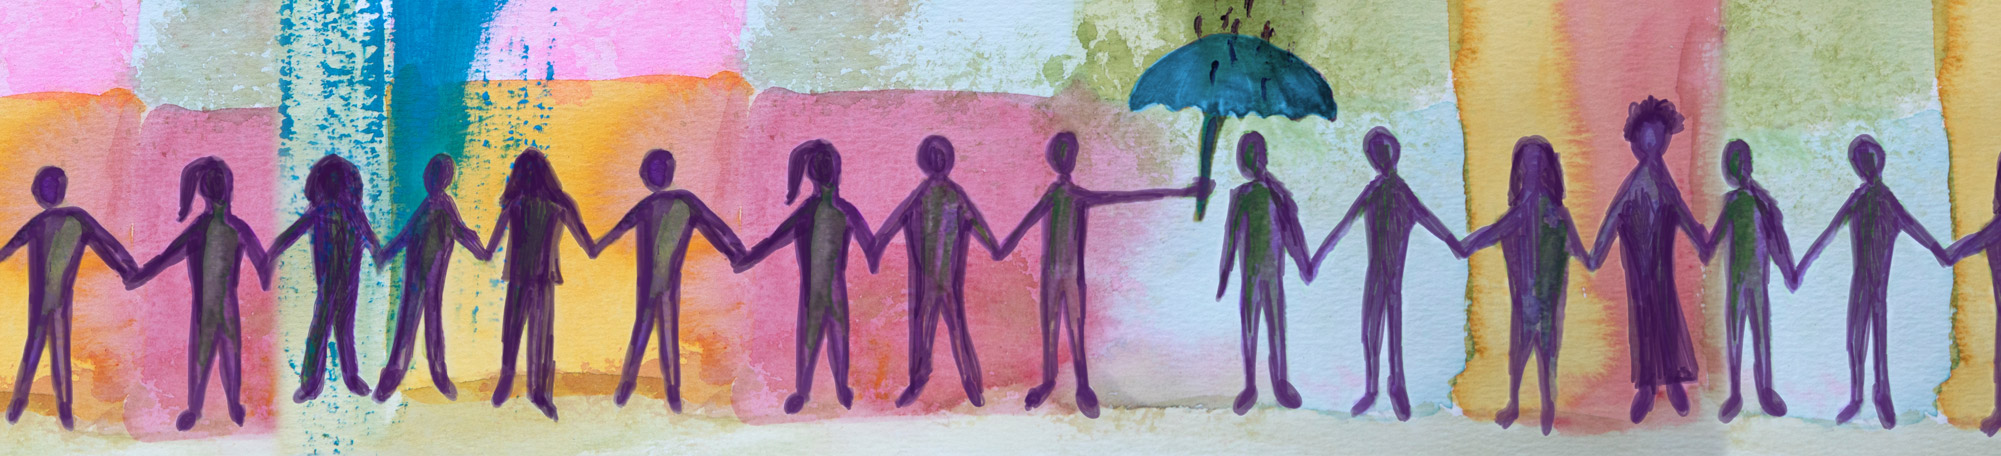 Abstract illustration of people in a row hand in hand. One person is holding a umbrella over one of them.